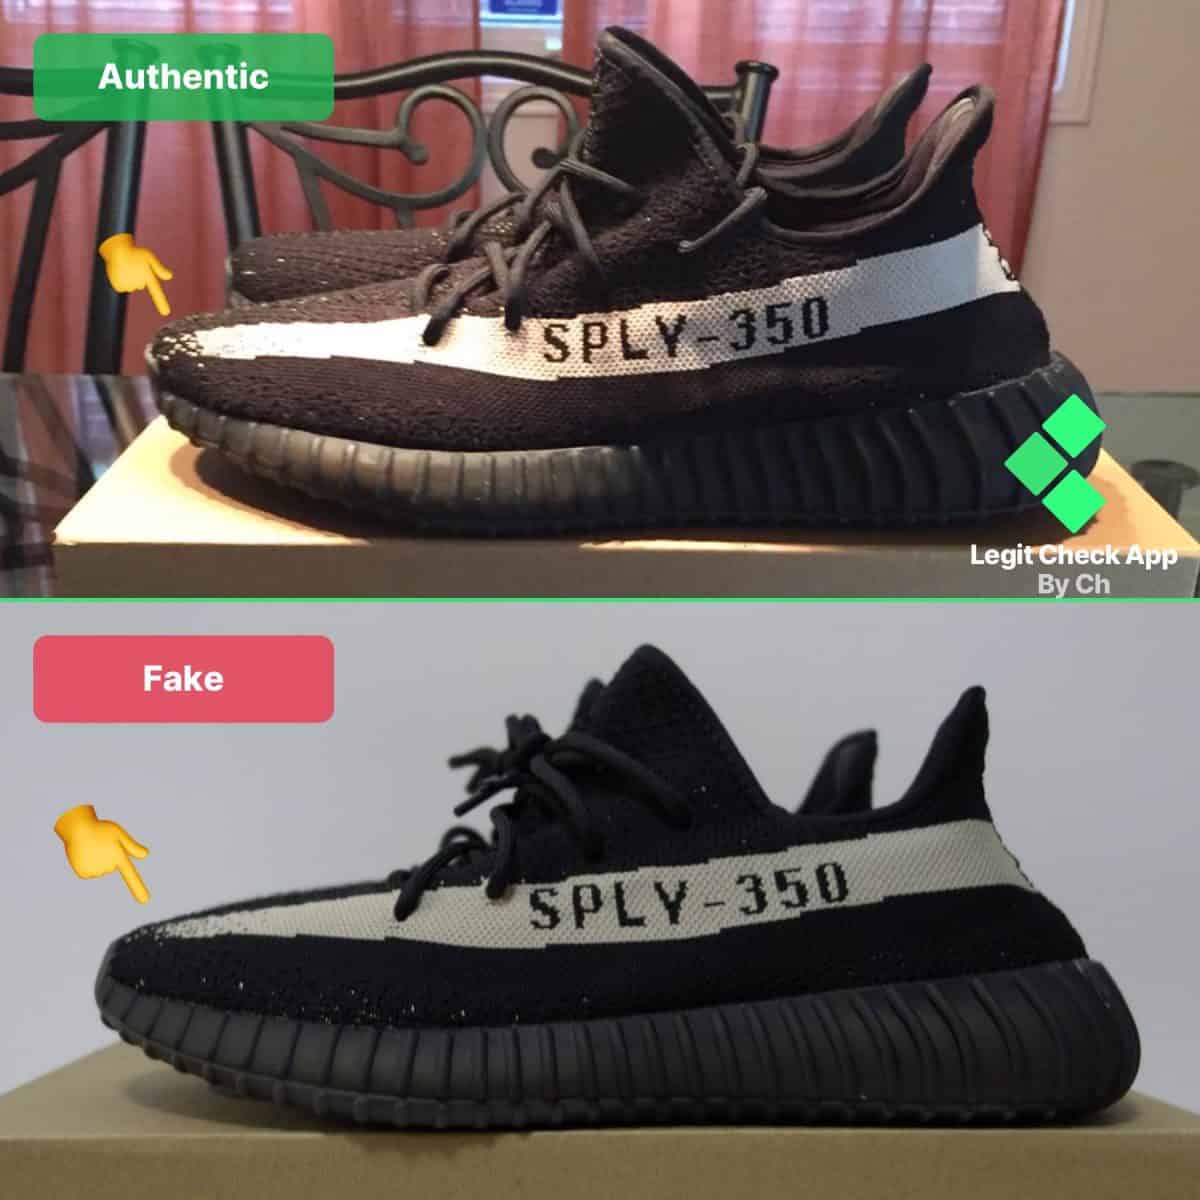 debt Have a picnic story Fake vs Real Yeezy Boost 350 V2 Oreo (Black/White) Guide - Legit Check By Ch